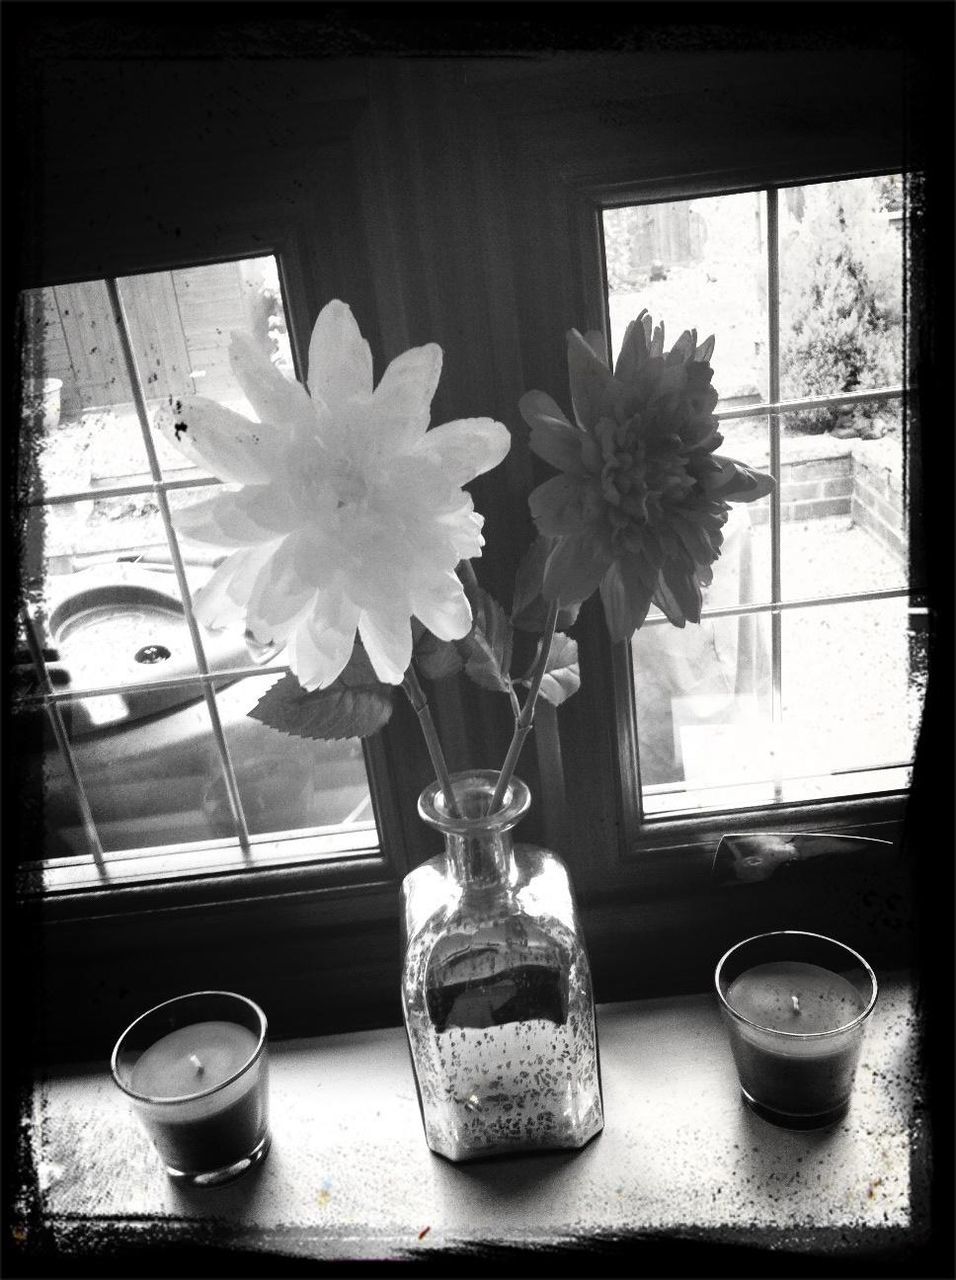 vase, flower, table, window, indoors, drink, no people, freshness, day